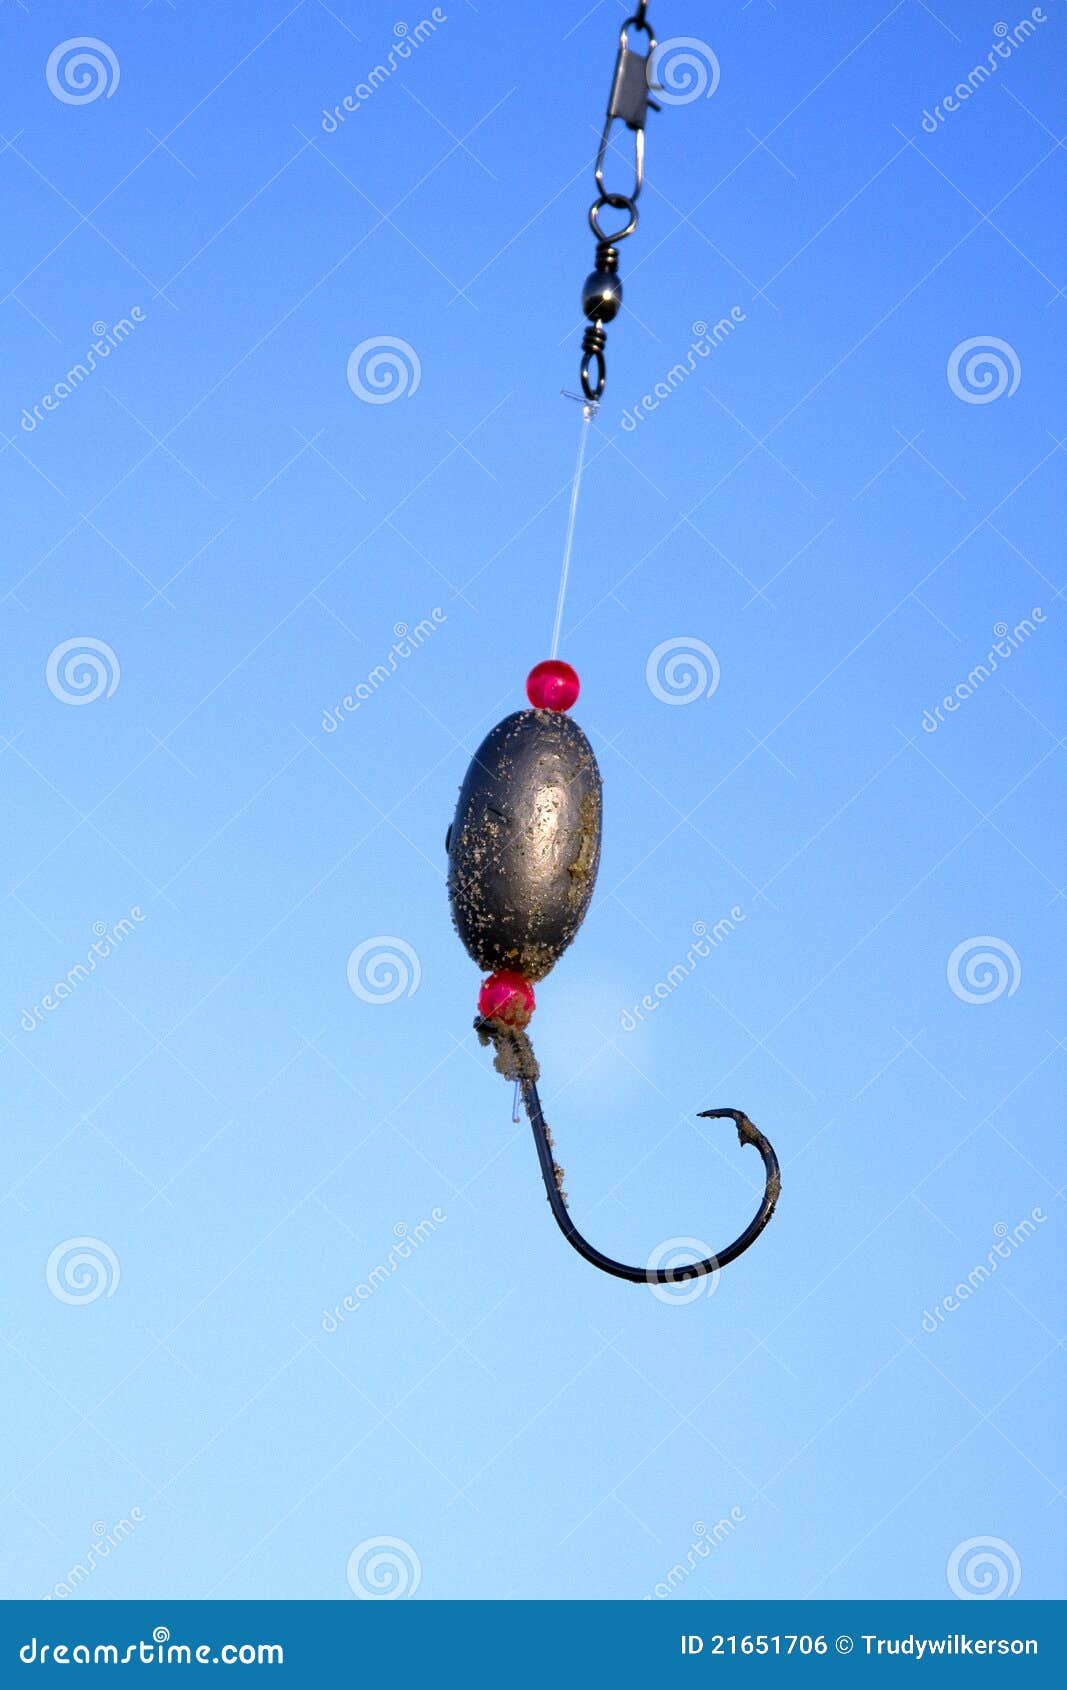 Hook, Line and Sinker stock photo. Image of pole, recreation - 21651706